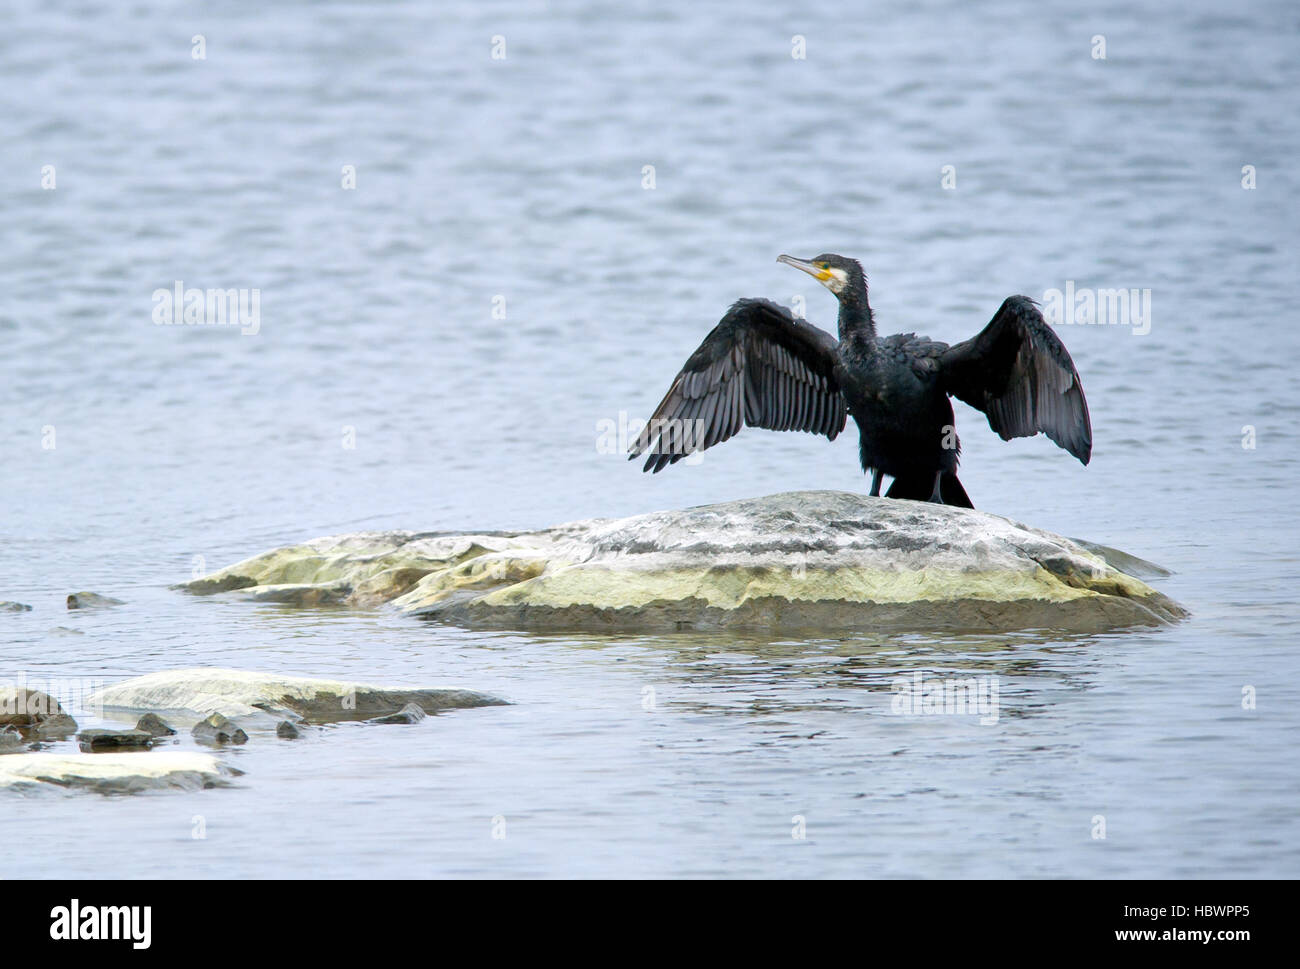 The Great Cormorant (Phalacrocorax carbo) in a typical view drying its wings on an islet in the archipelago Stock Photo